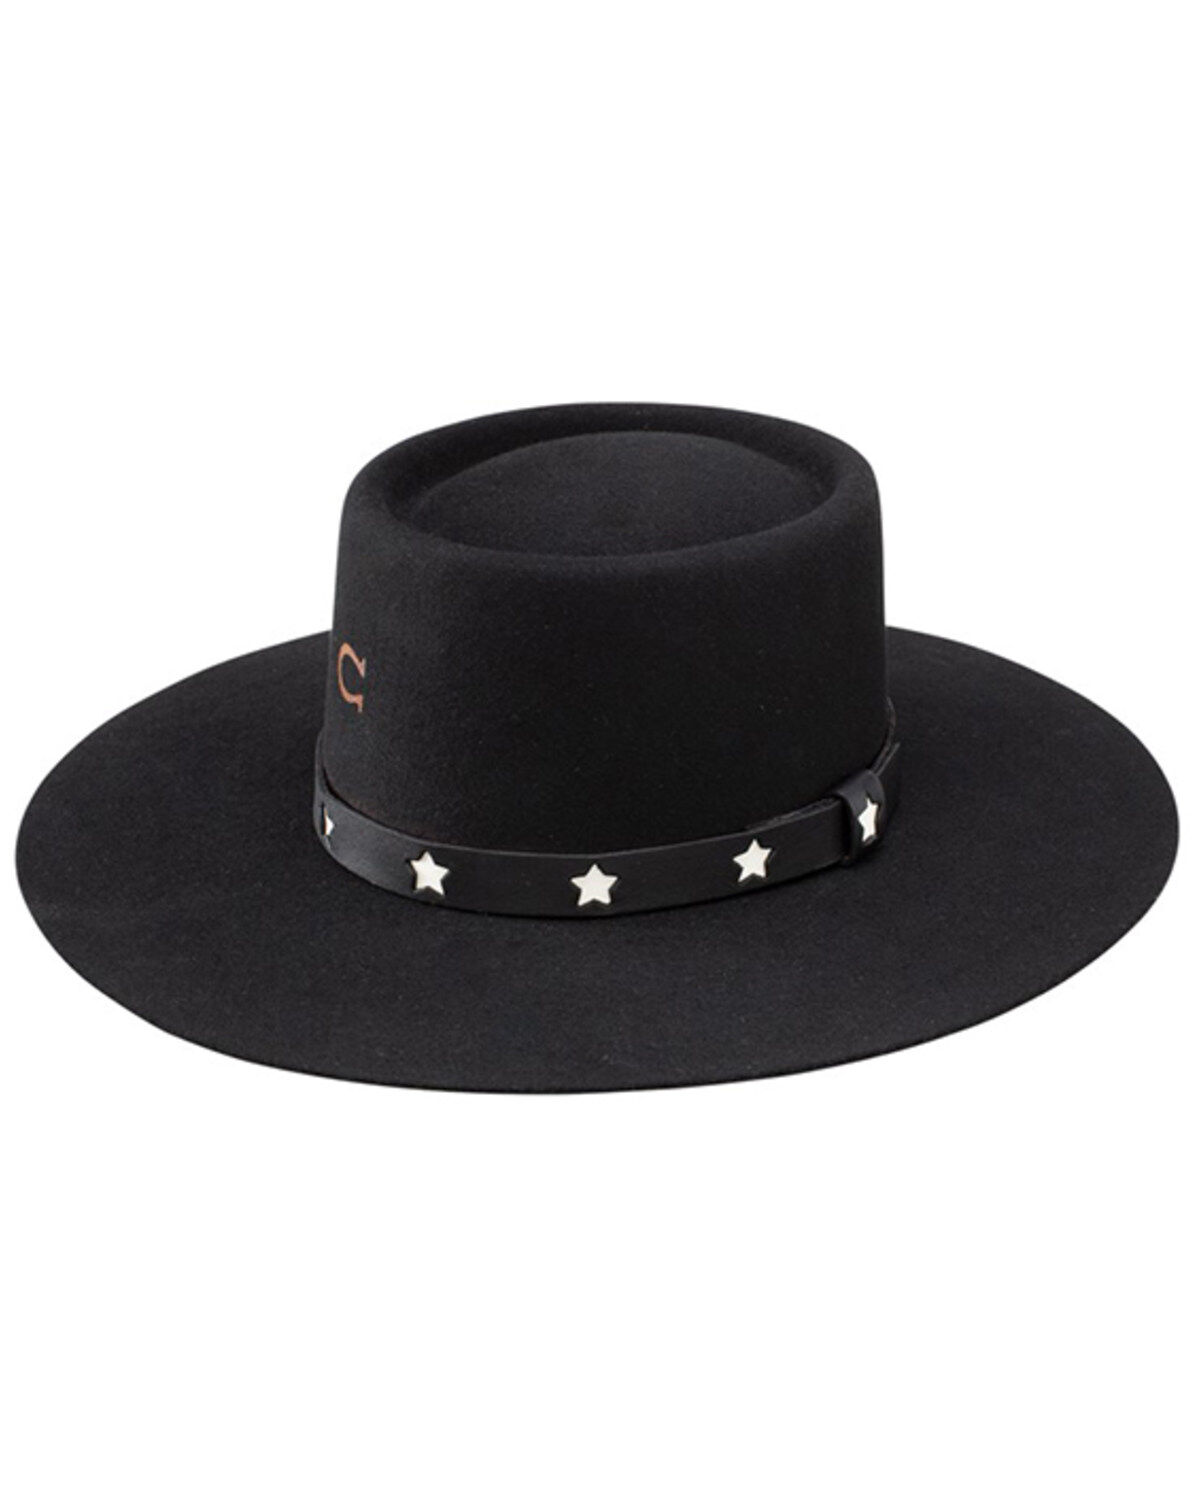 Charlie 1 Horse Womens Black Shantung Hat with Antique Concho Band 